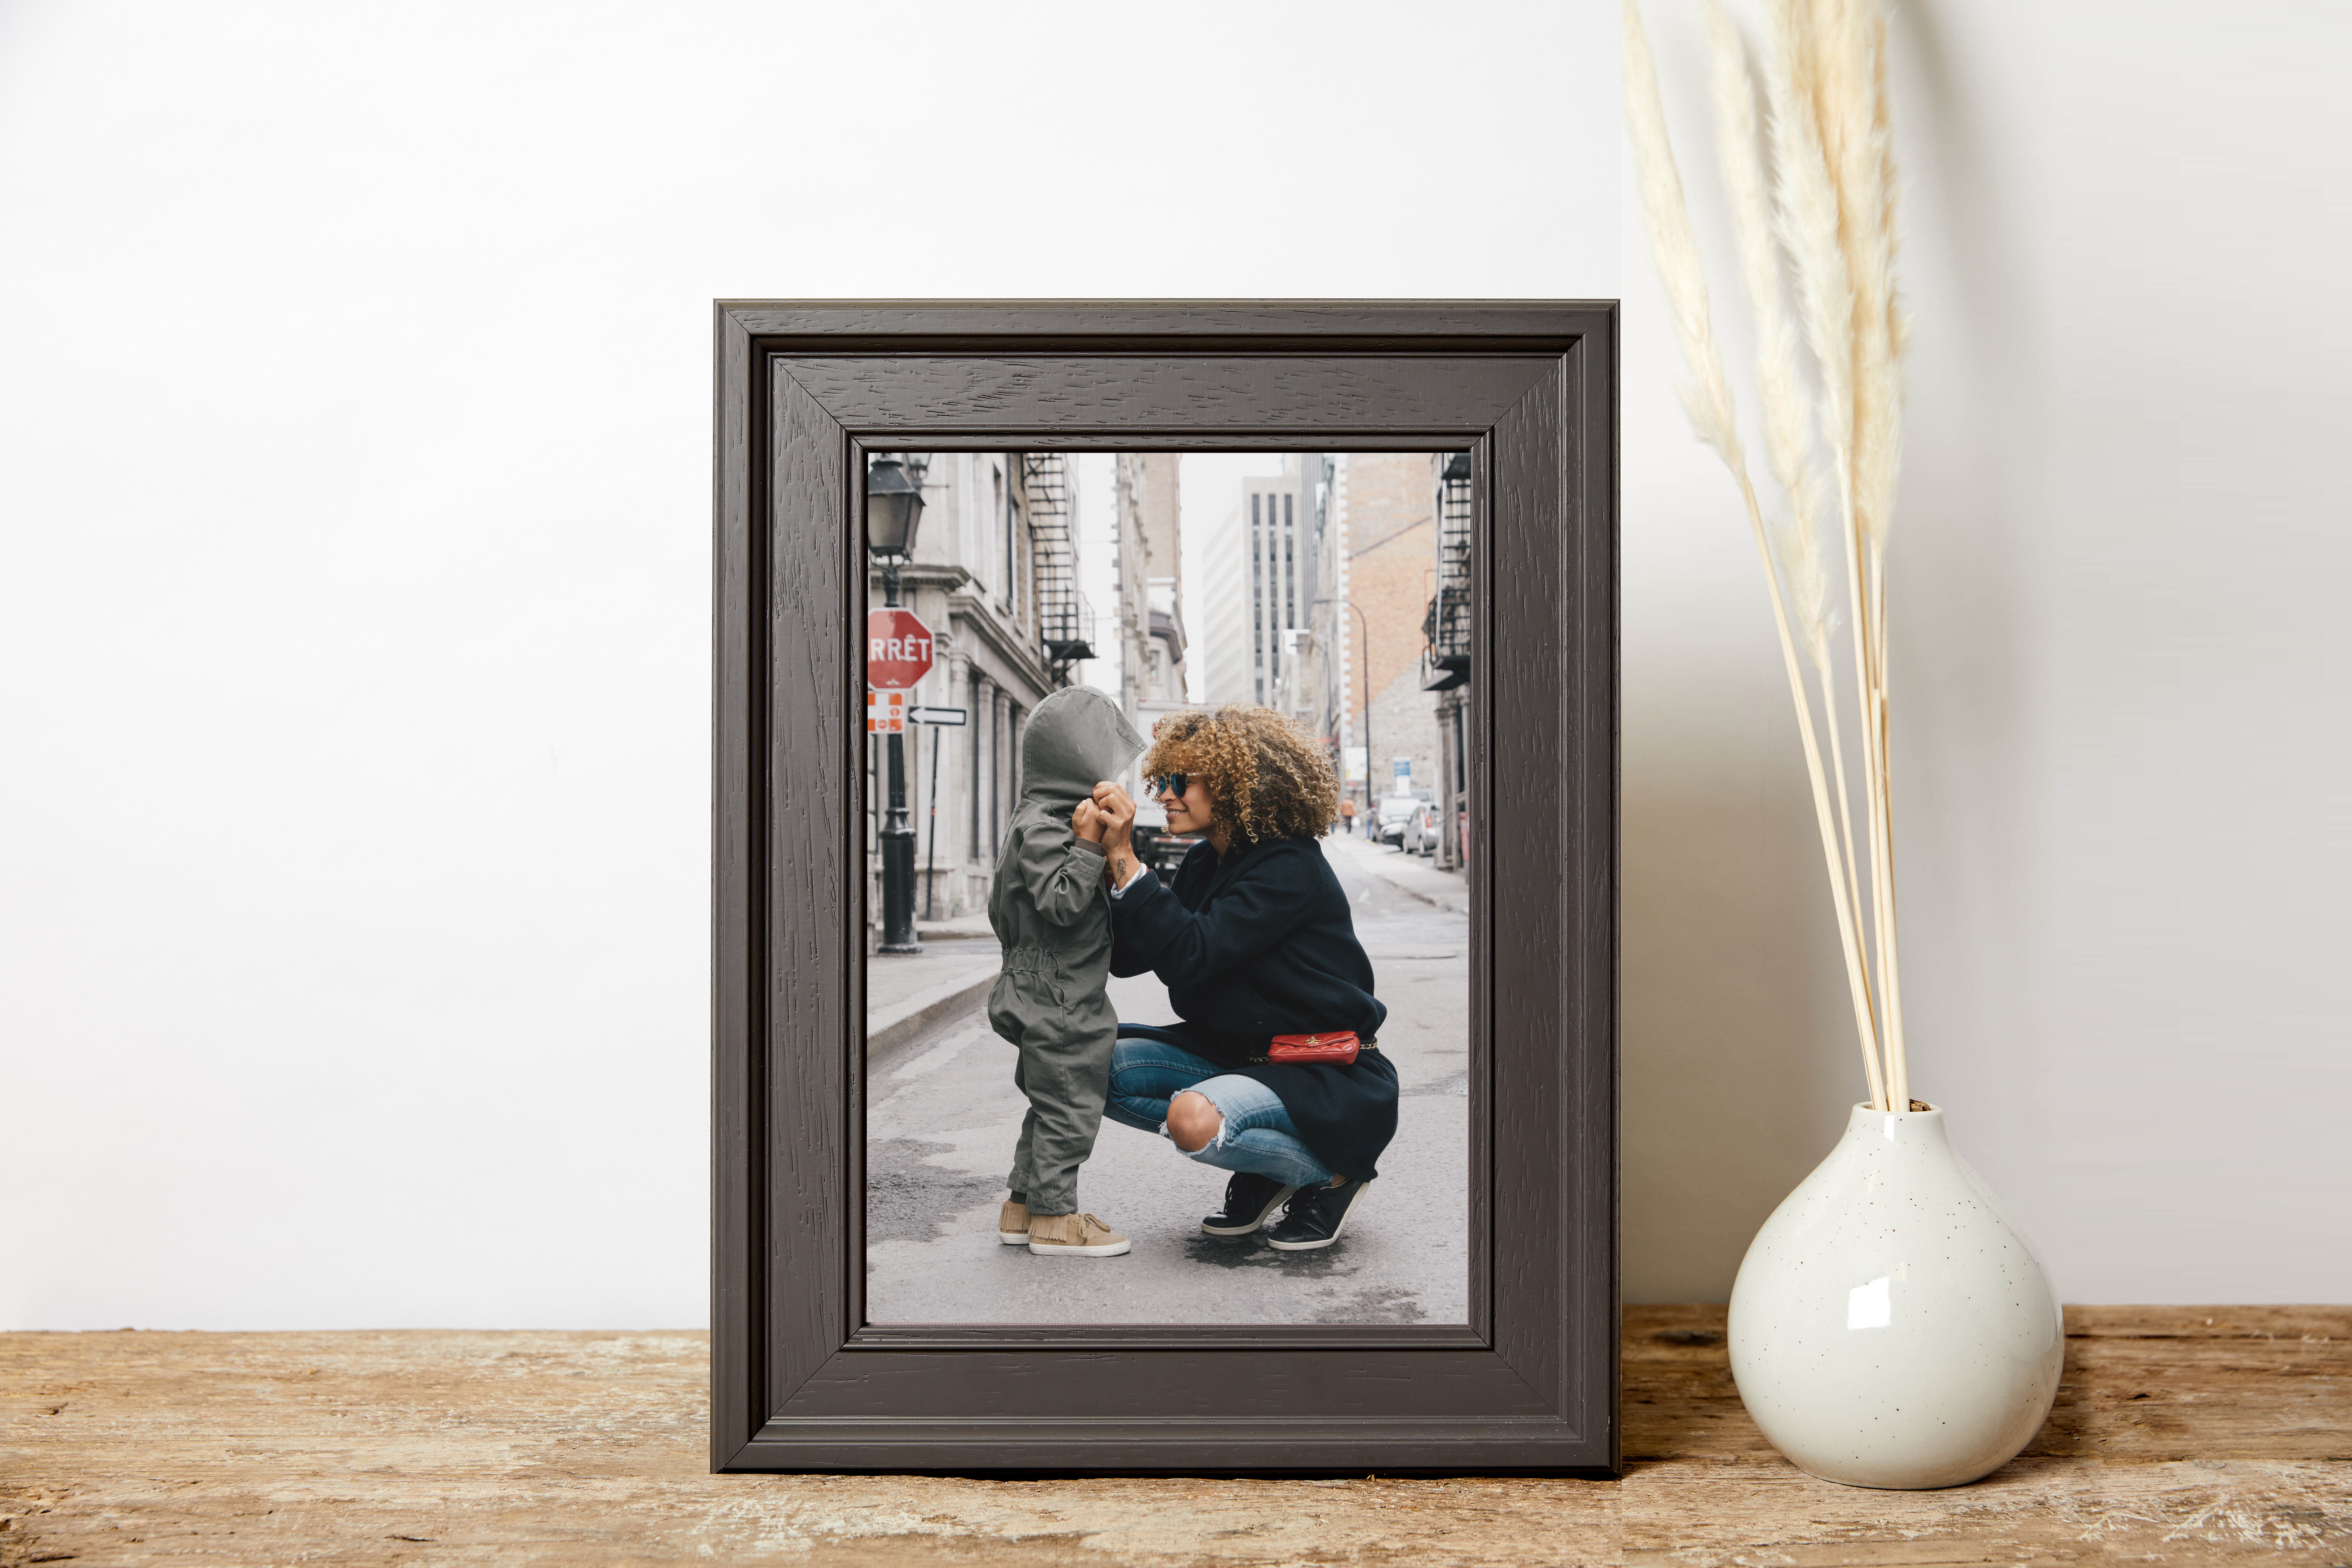 Print your city photos and display them inside of our hand made quality photo frames for a luxurious finish and addition to your home decor